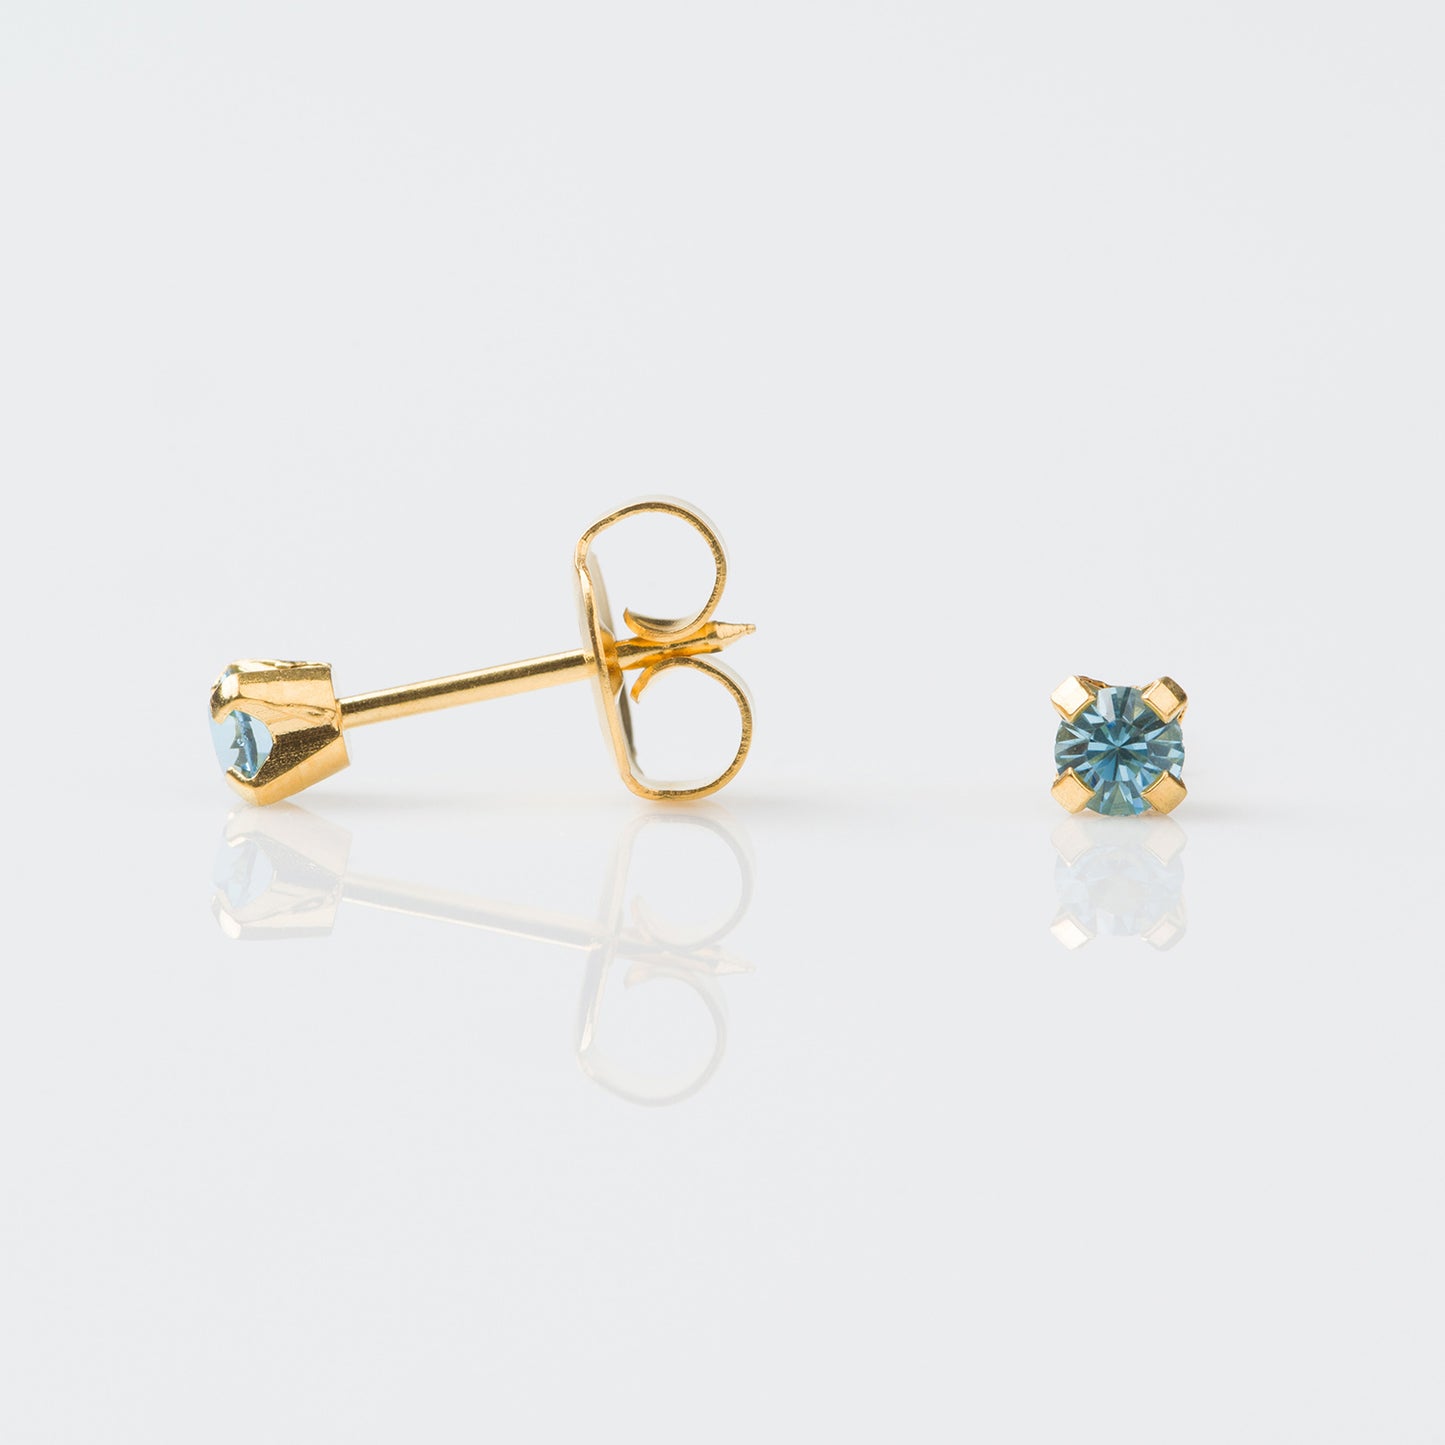 STUDEX Tiny Tips Gold Plated 3mm Clawset March Aquamarine